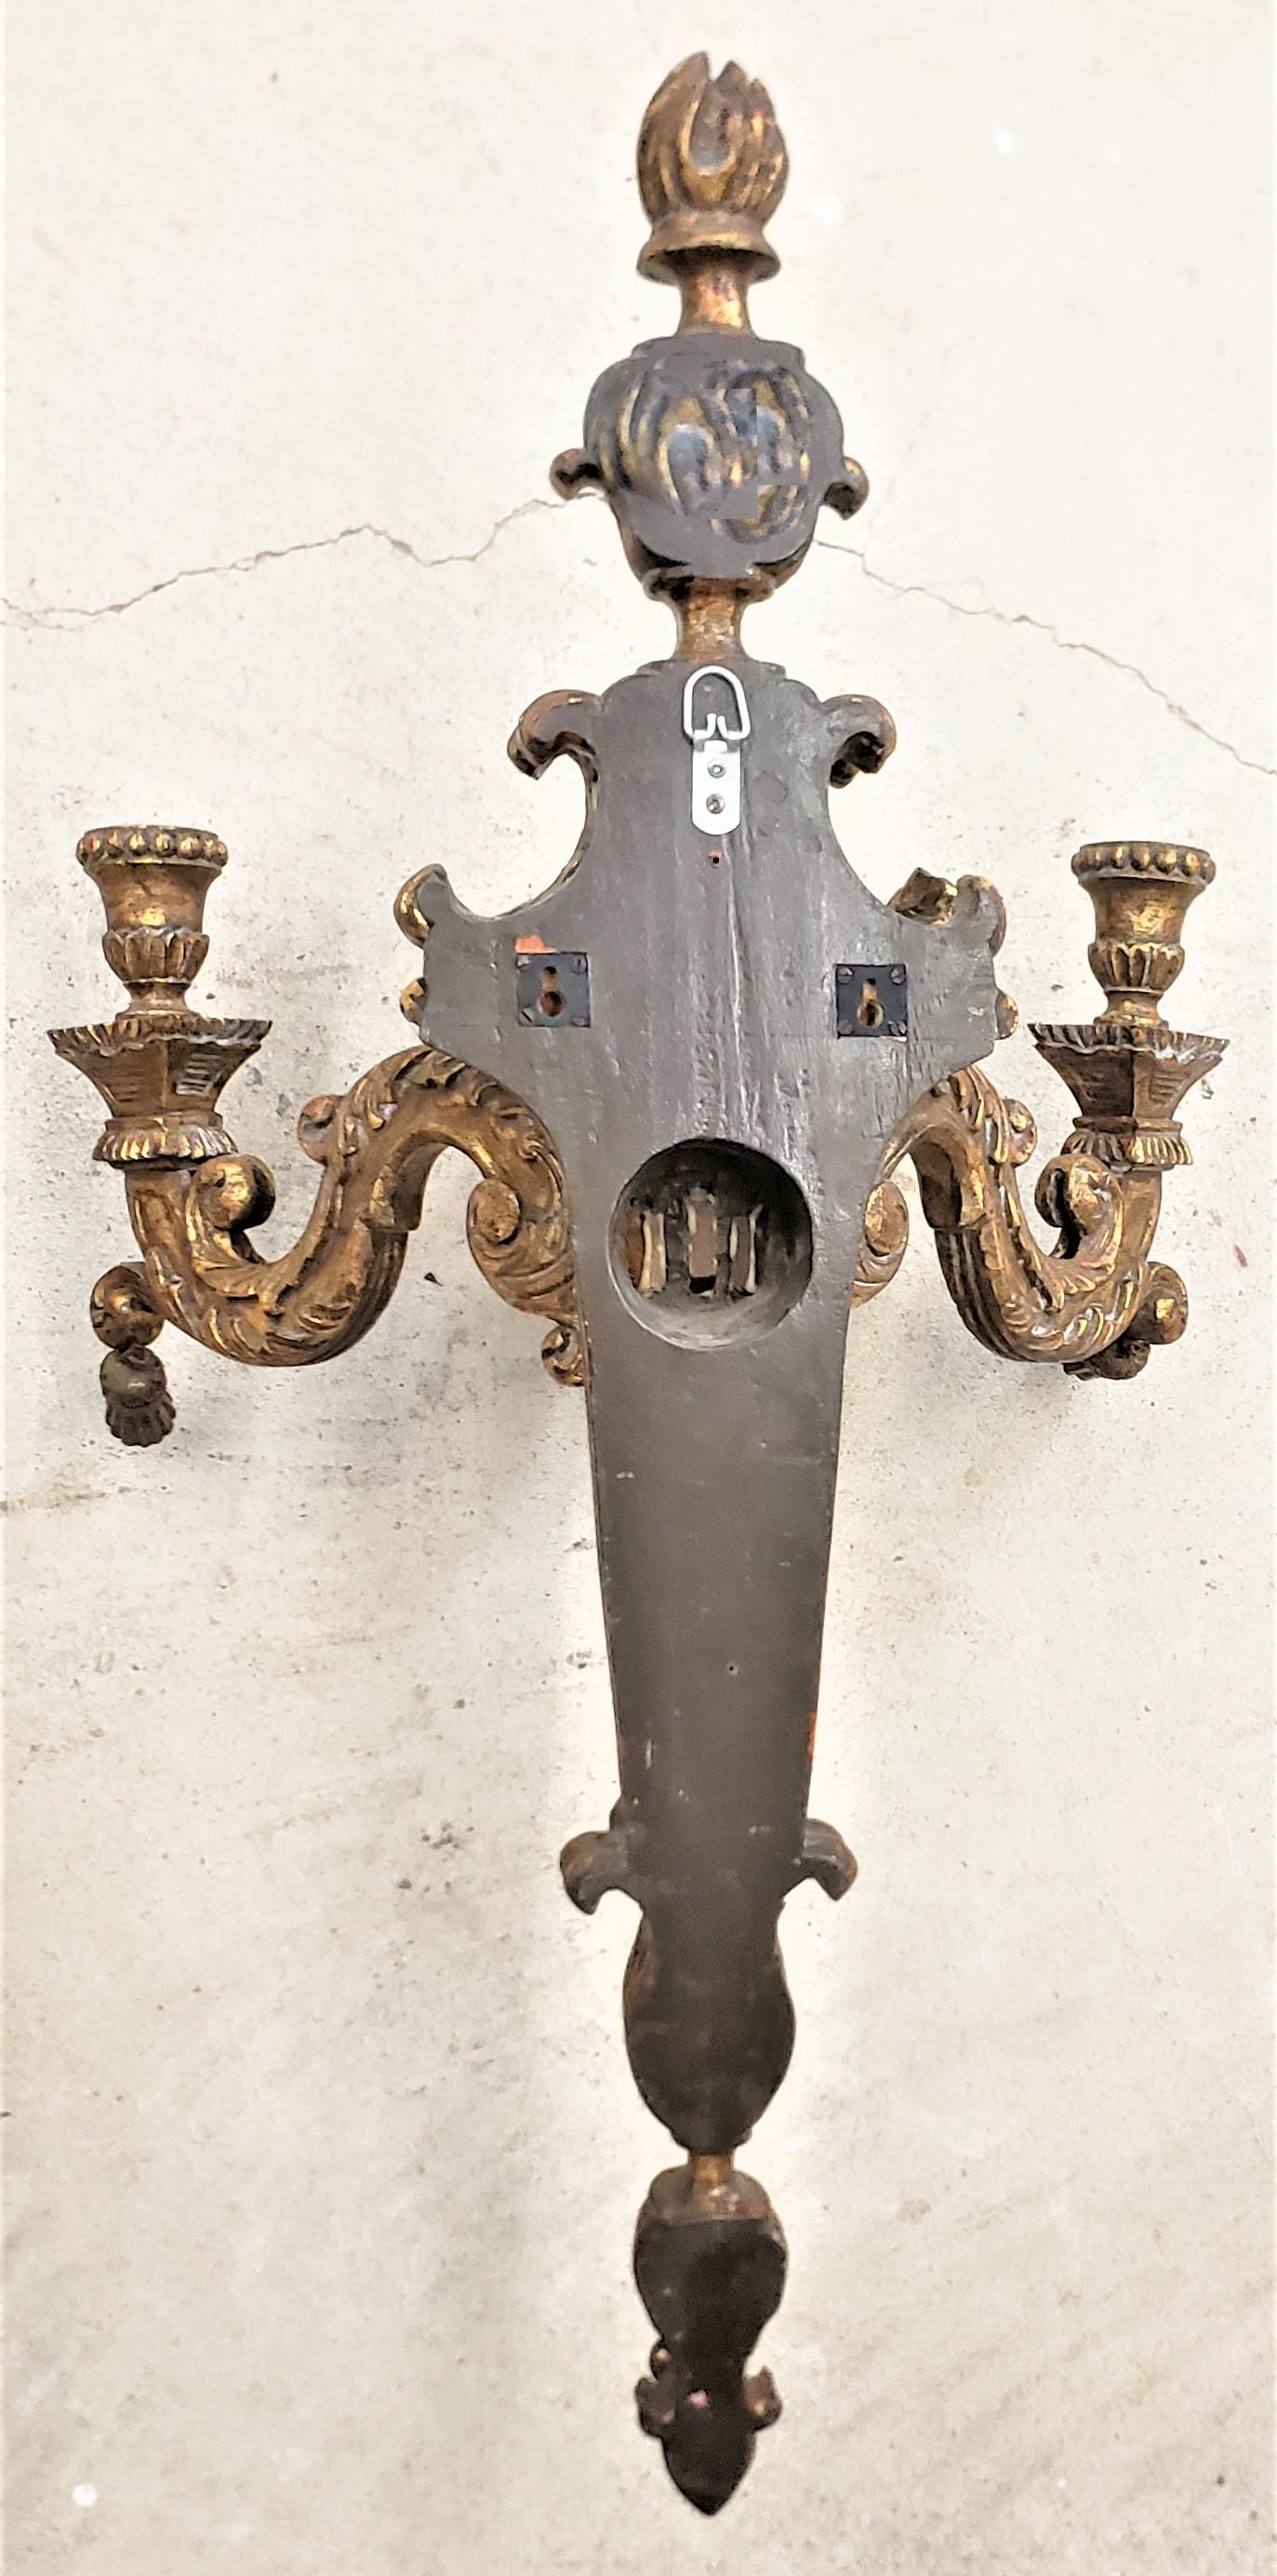 Pair of Large Carved & Gilt Finished Wooden Candle Wall Sconces or Holders 6